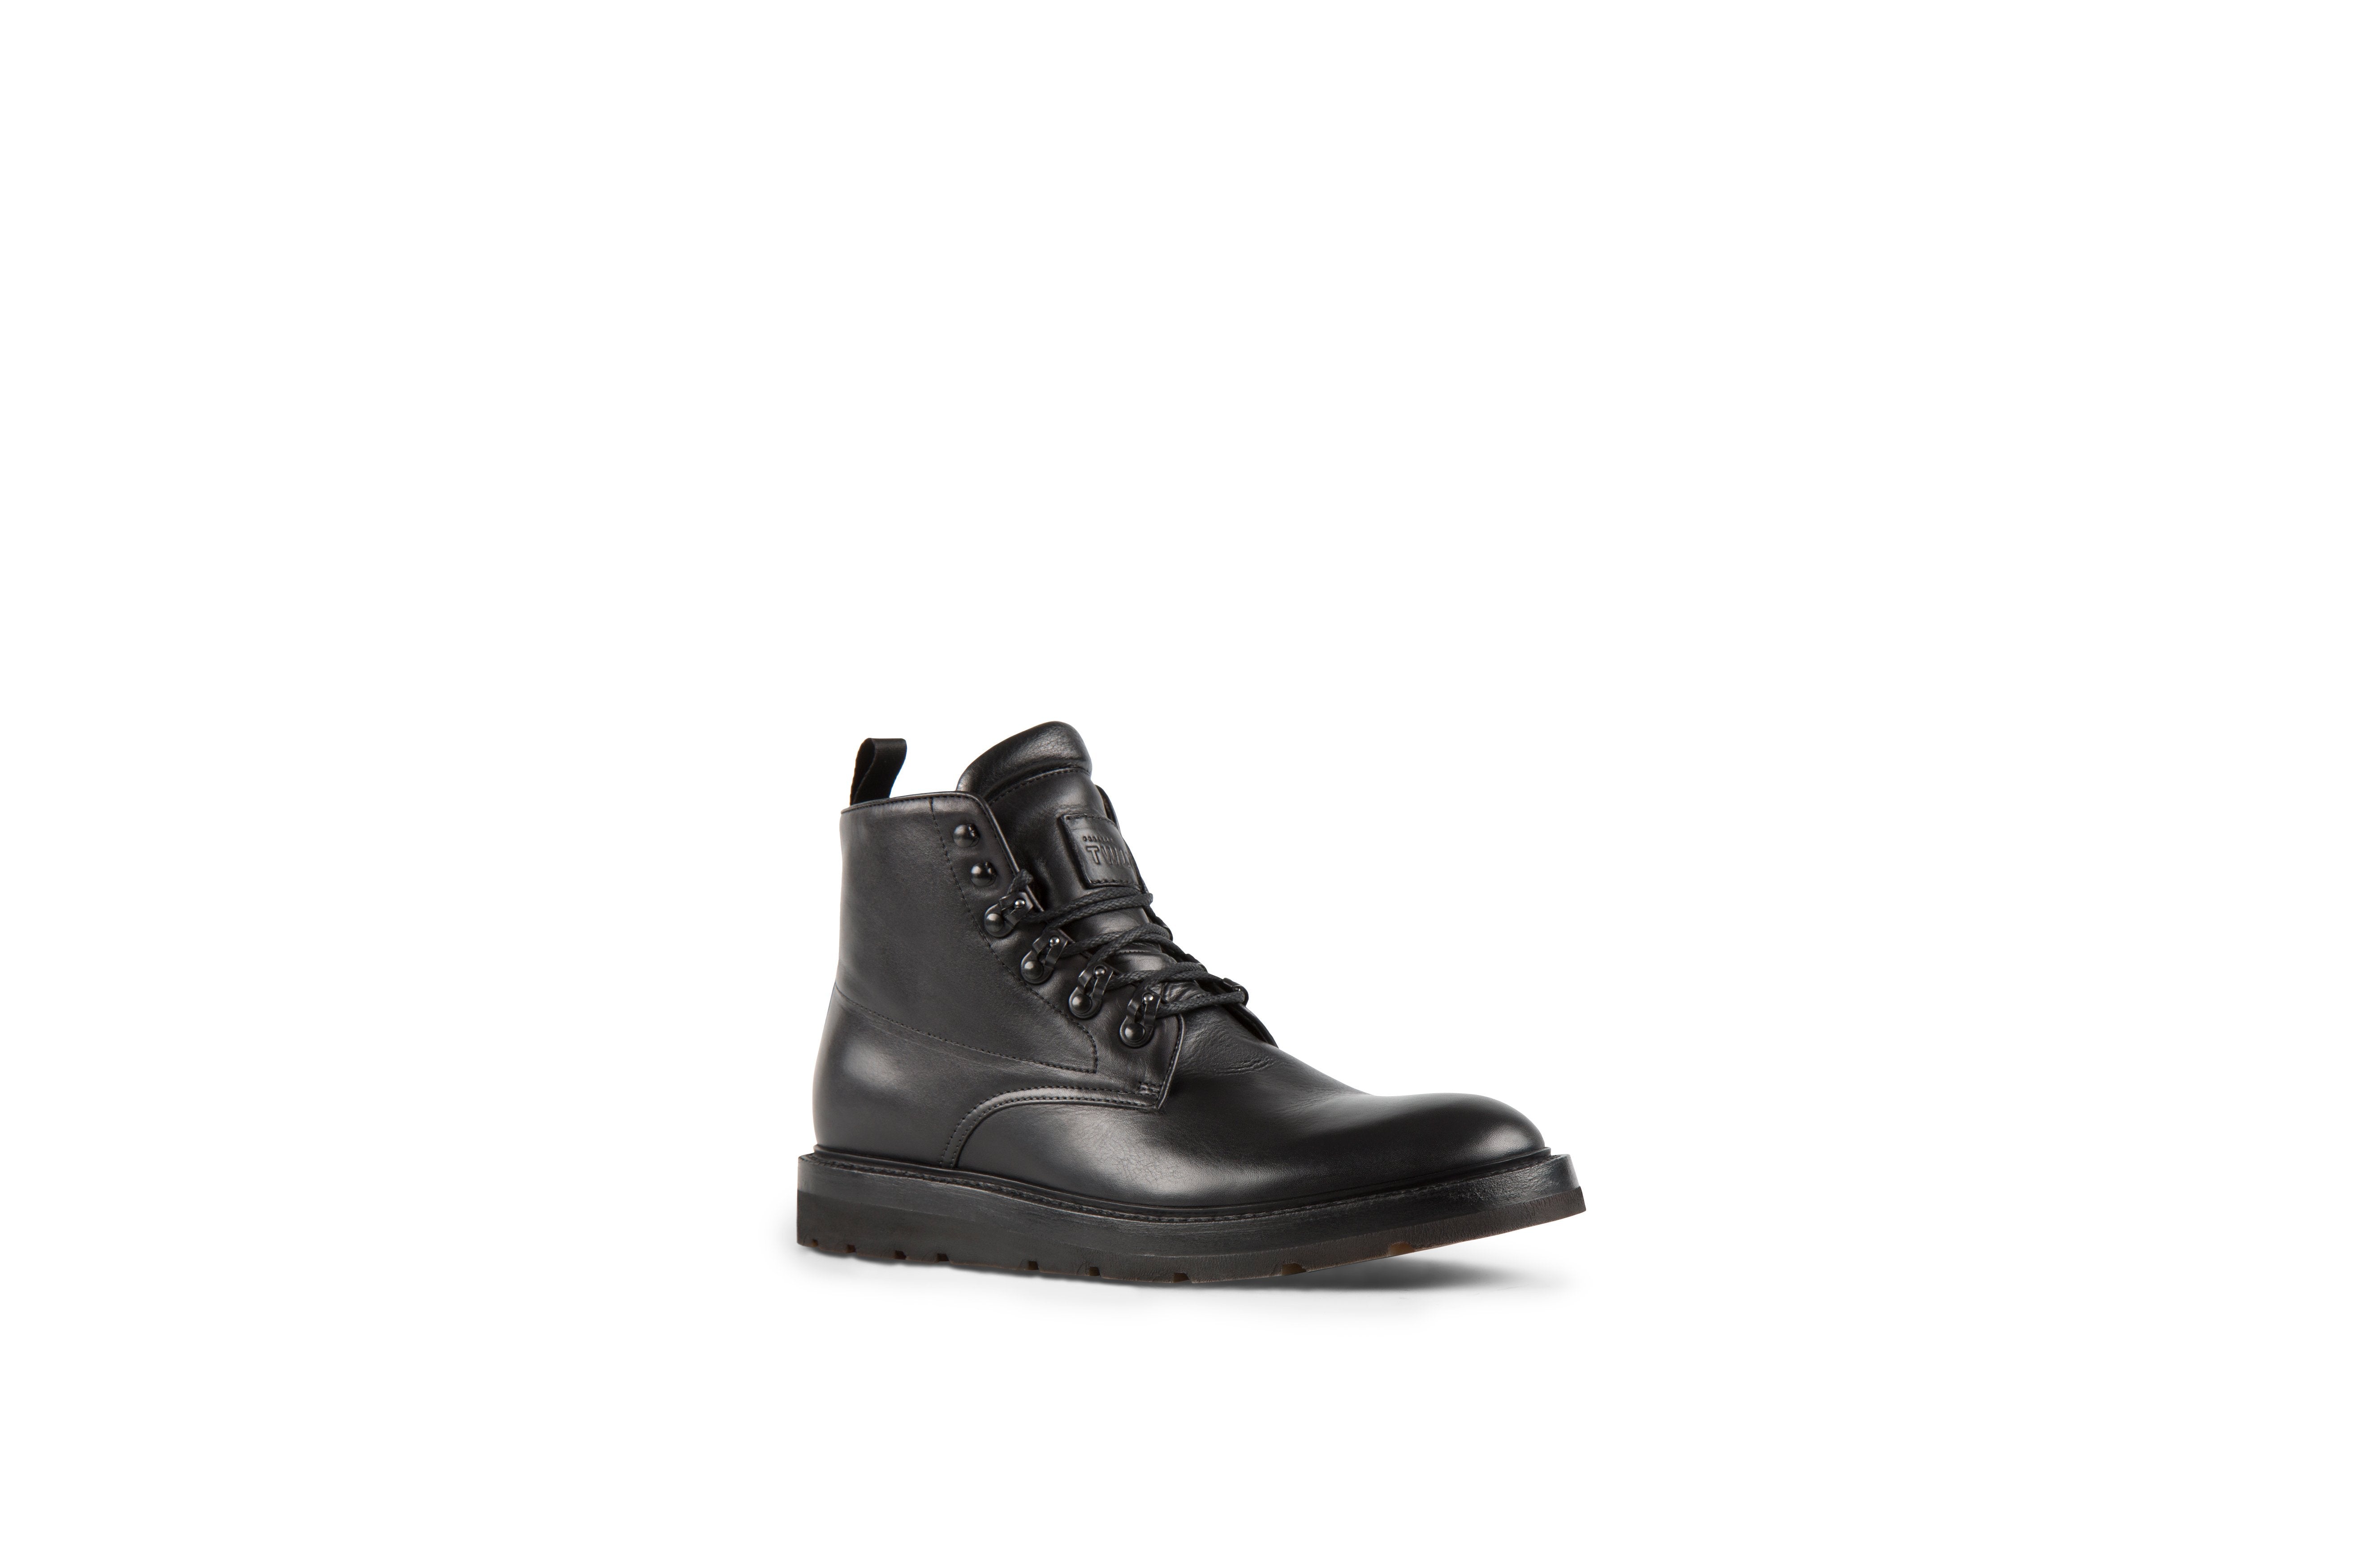 Play Black Cordovan Leather Balmoral Boots